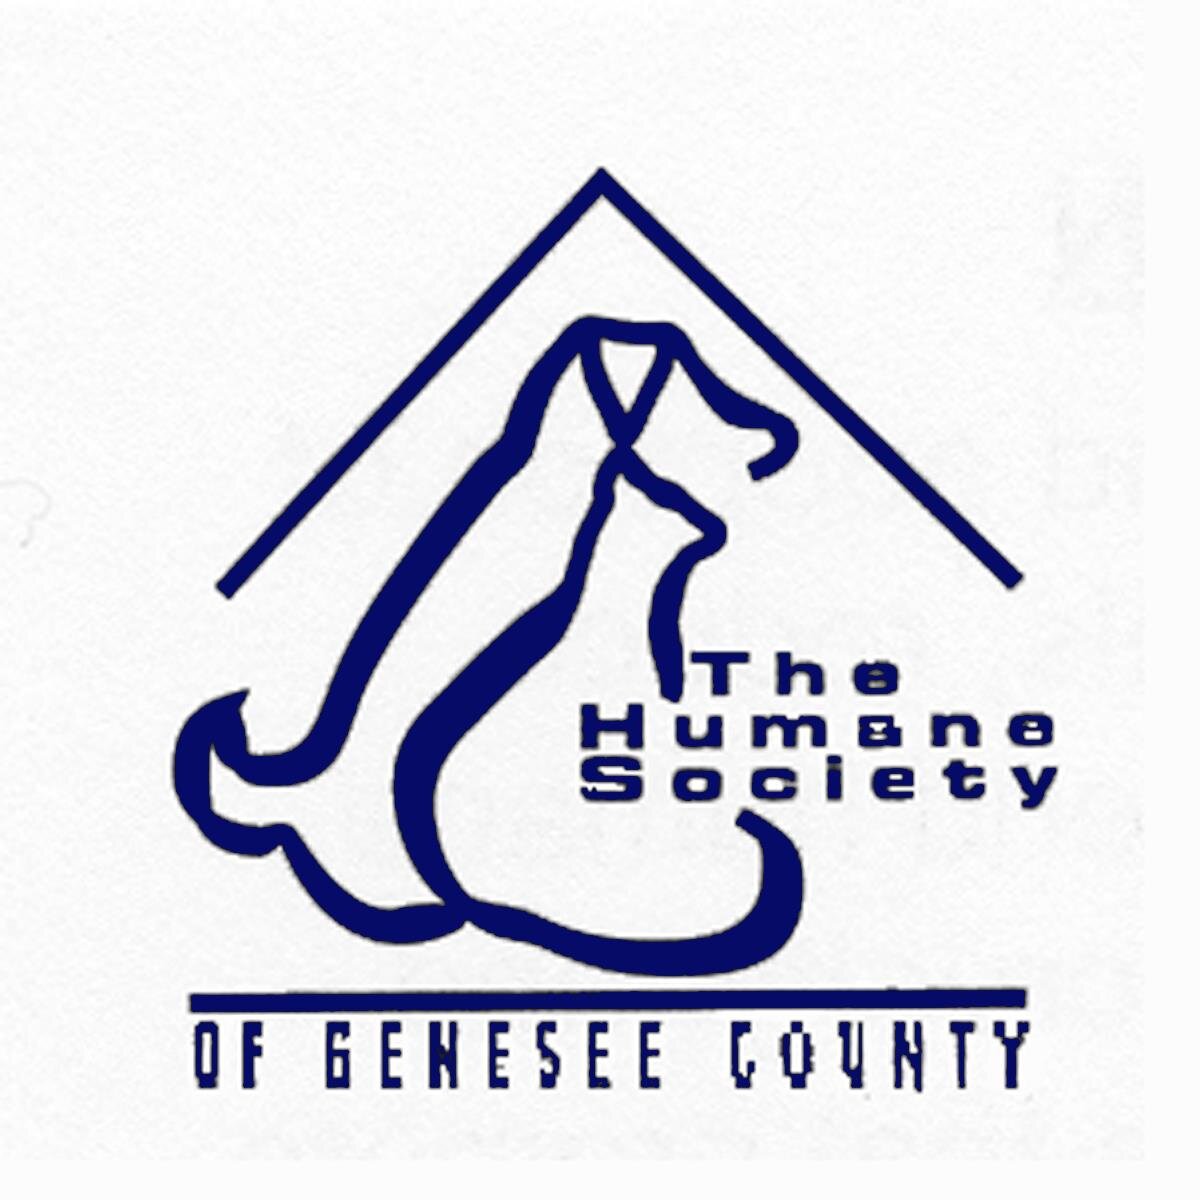 Official Twitter of The Humane Society of Genesee County. Our goal is to prevent cruelty, educate the public, and find wonderful homes for our pets .